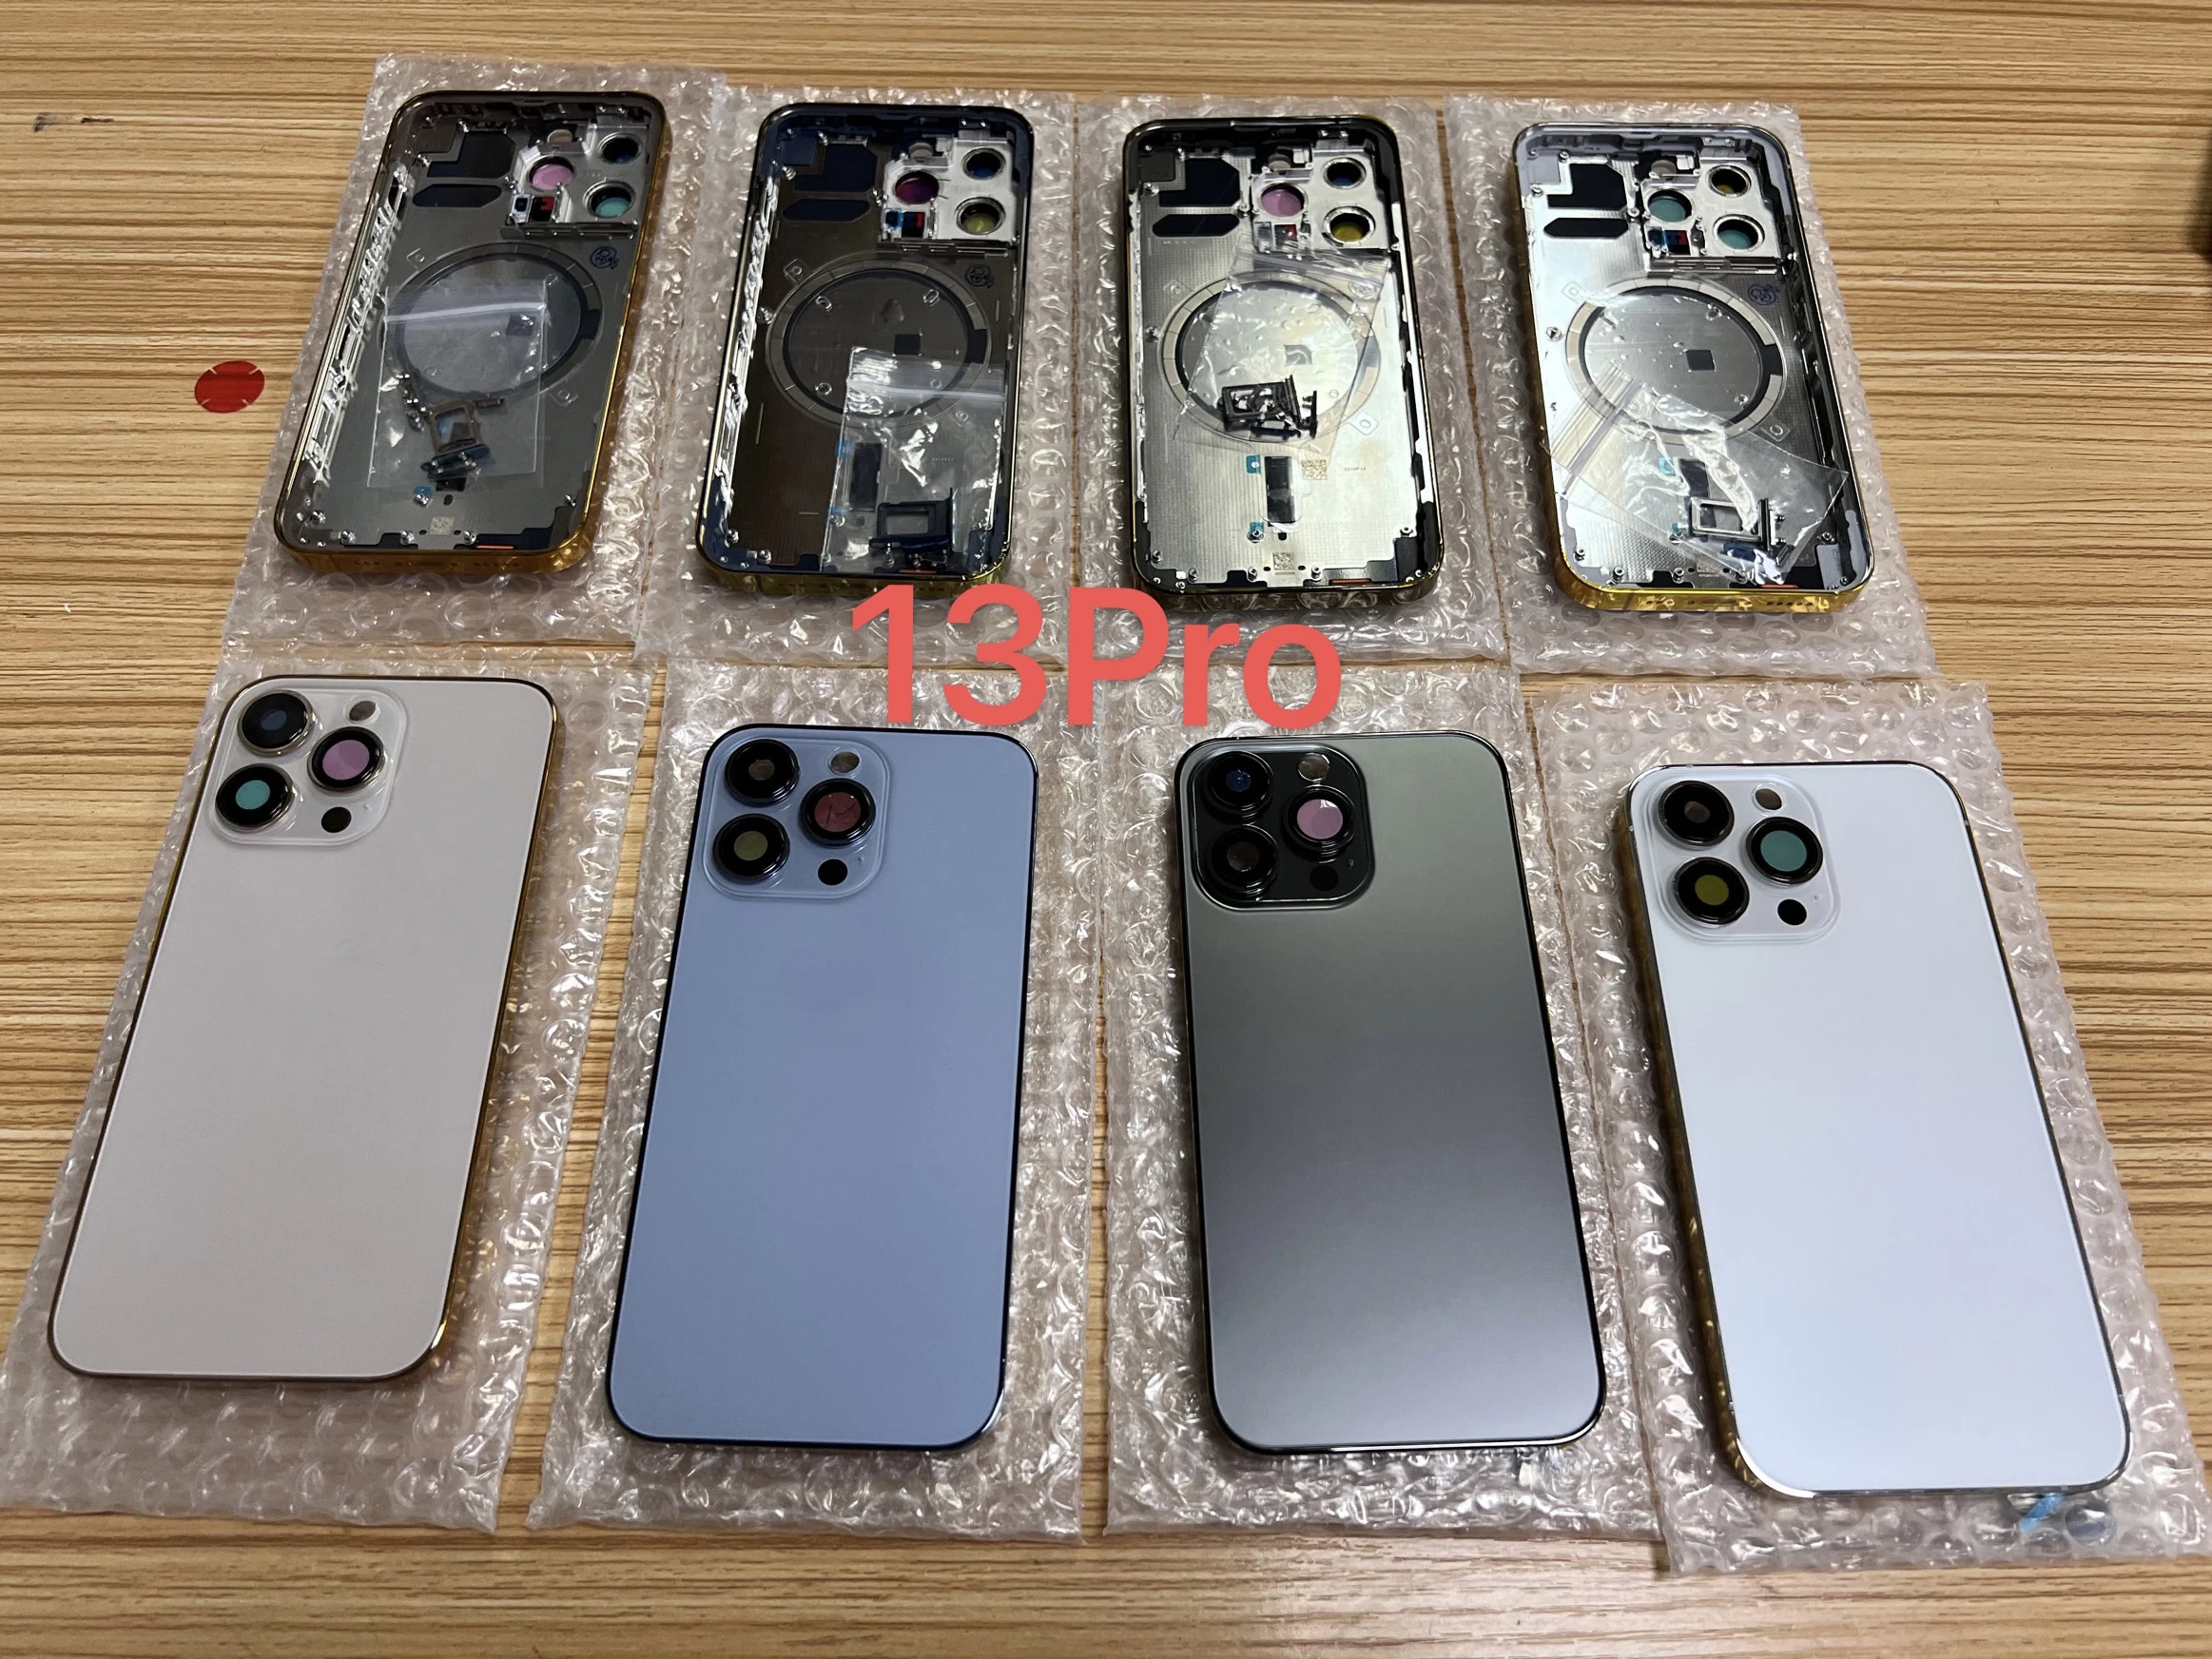 5pcs for iPhone X XS XSMAX XR 11 Pro Max 12 PRO MAX 13 PRO MAX battery back door cover mid frame case  back glass housing enlarge